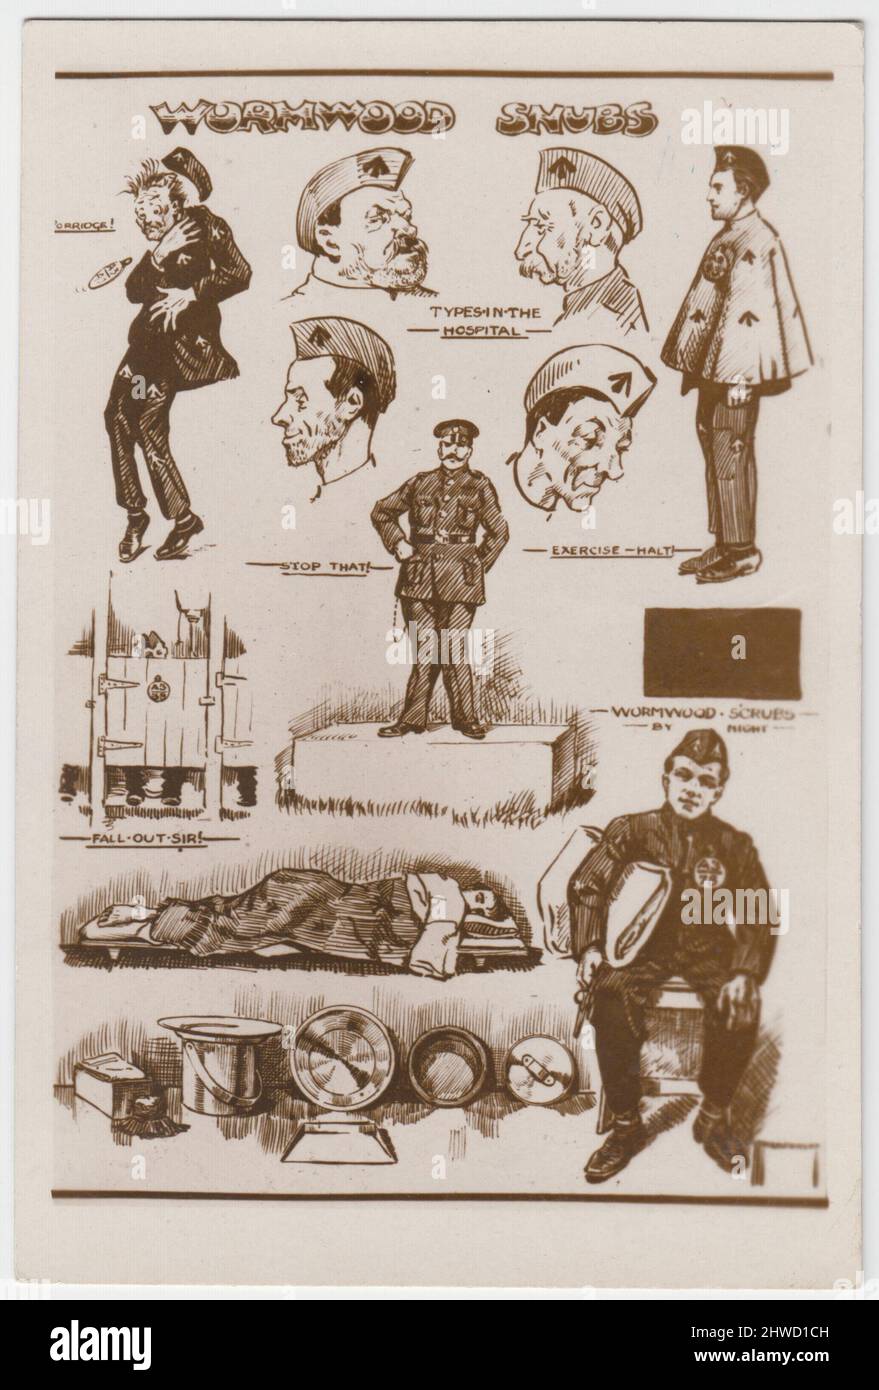 'Wormwood Snubs': cartoons about a conscientious objector's experiences in Wormwood Scrubs prison during the First World War. They include drawings of 'types in the hospital', the toilets, prison bunk, someone choking on porridge and a prison guard. These were photographed and sold as a postcard by W. Tetley, photographer, 19 Chapter Row, South Shields Stock Photo